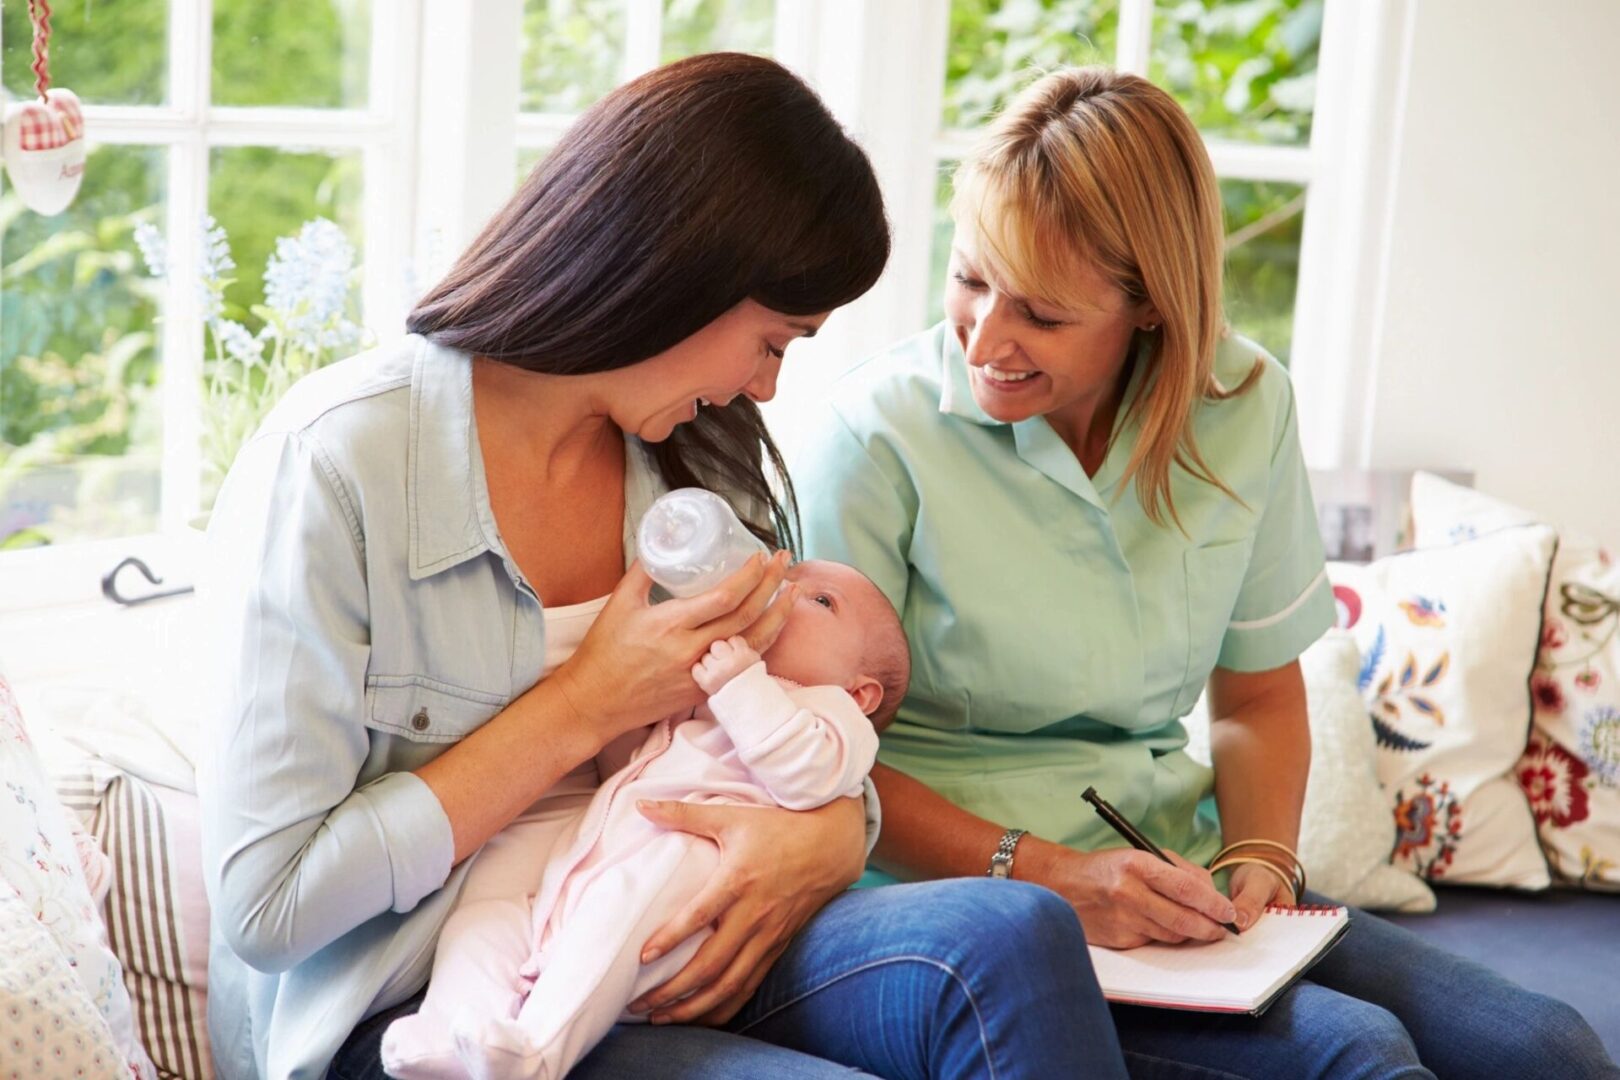 Two women are holding a baby and smiling.